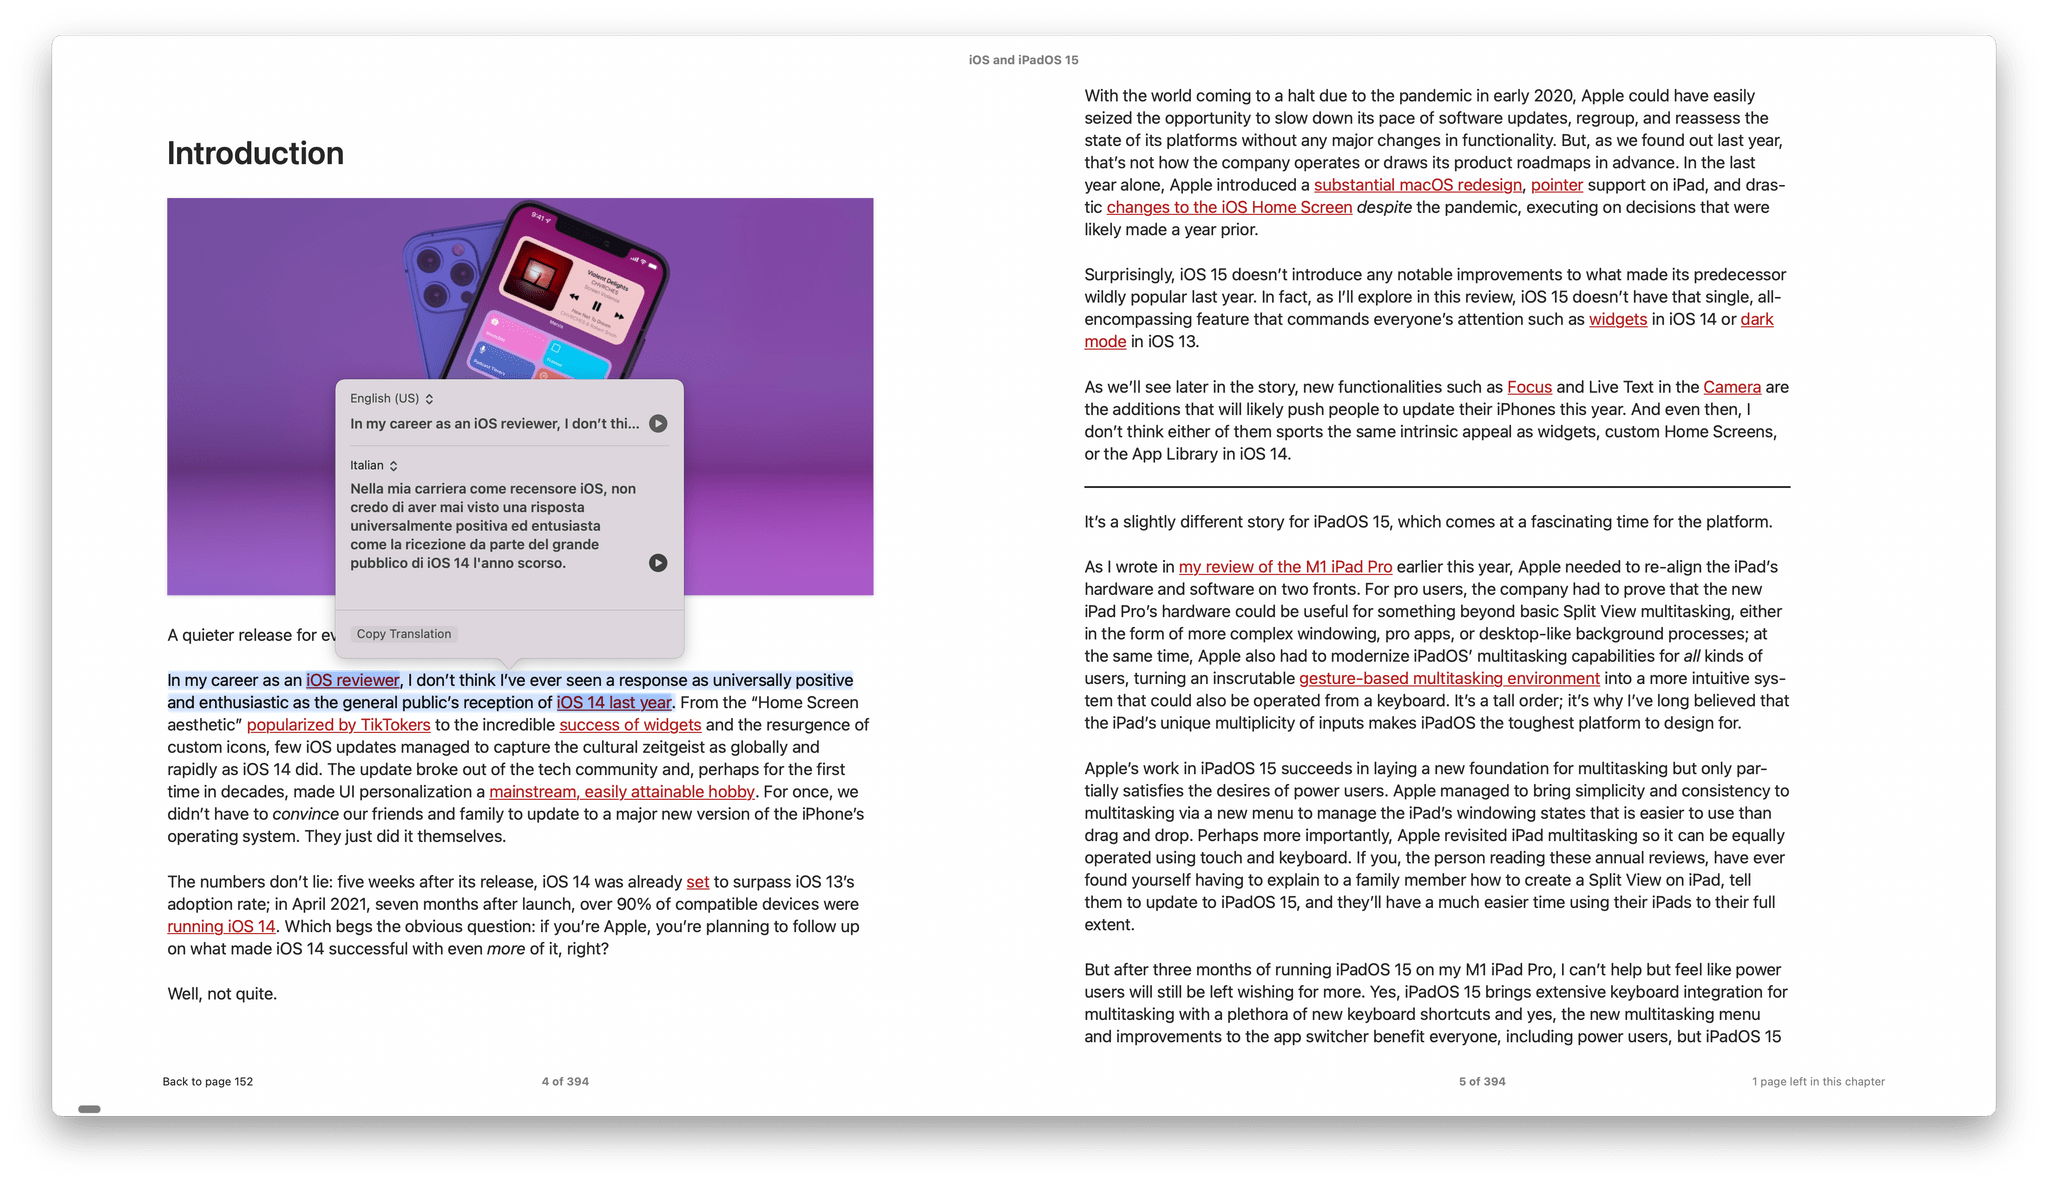 Translating the introduction of Federico's iOS and iPadOS 15 review into Italian in Books.